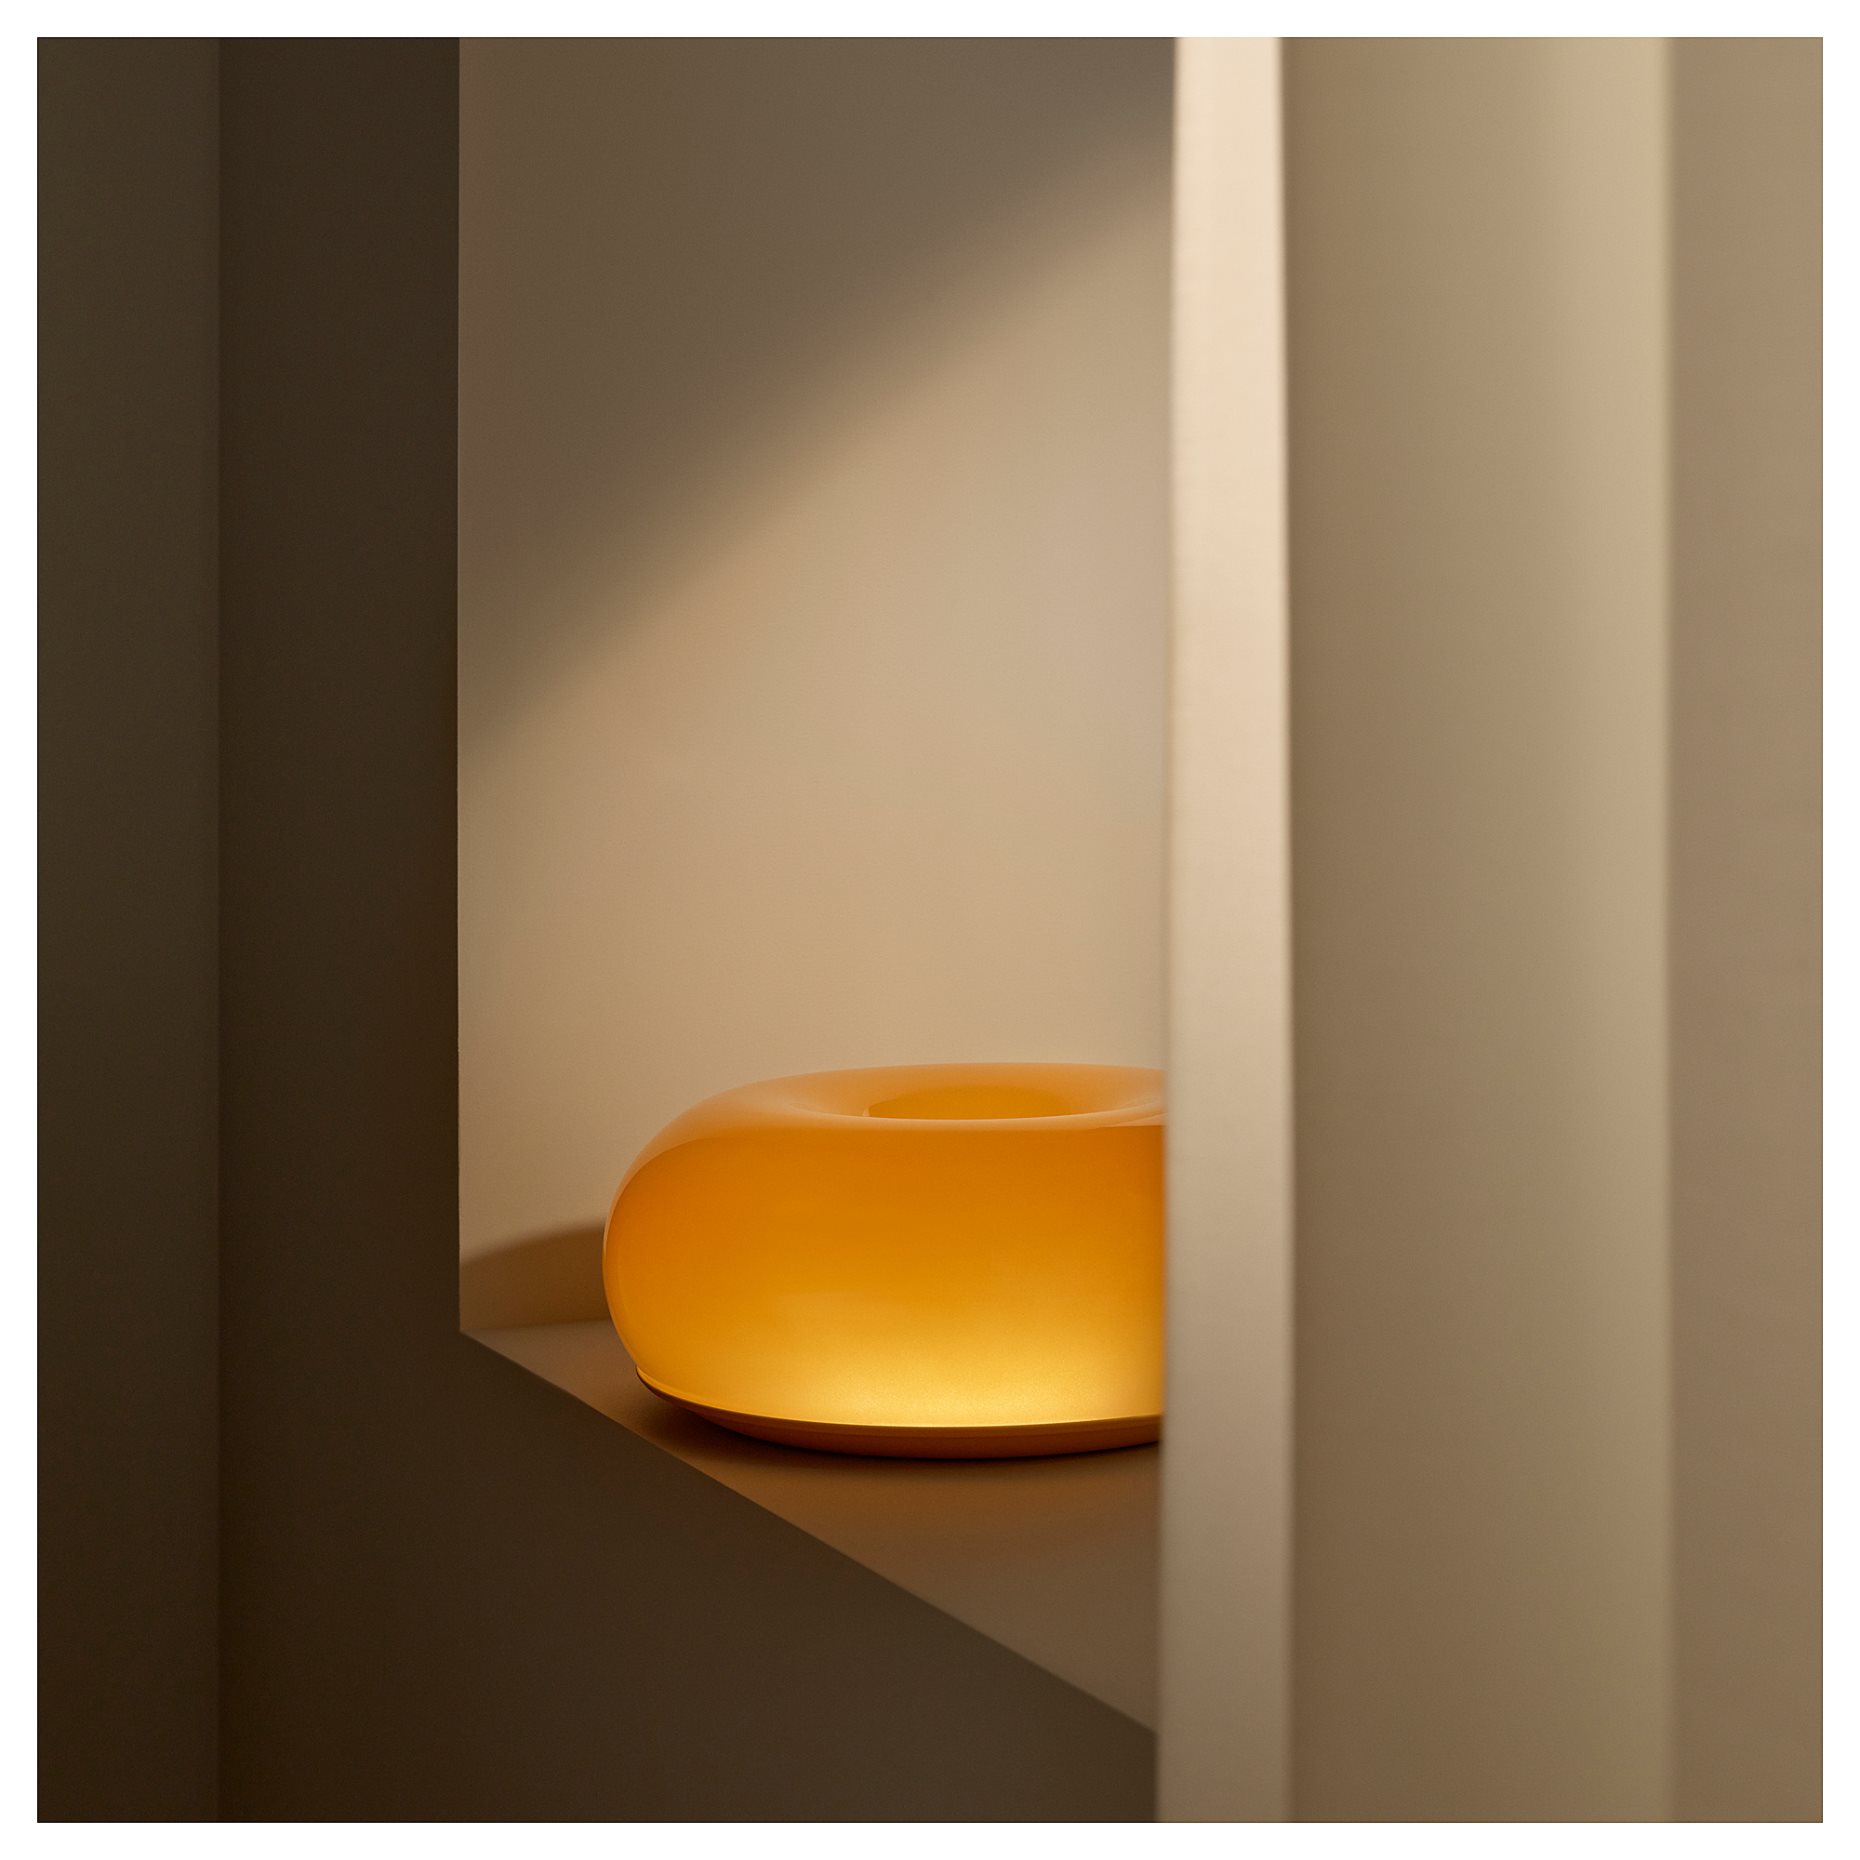 VARMBLIXT, table/wall lamp with built-in LED light source/glass/round, 804.991.99